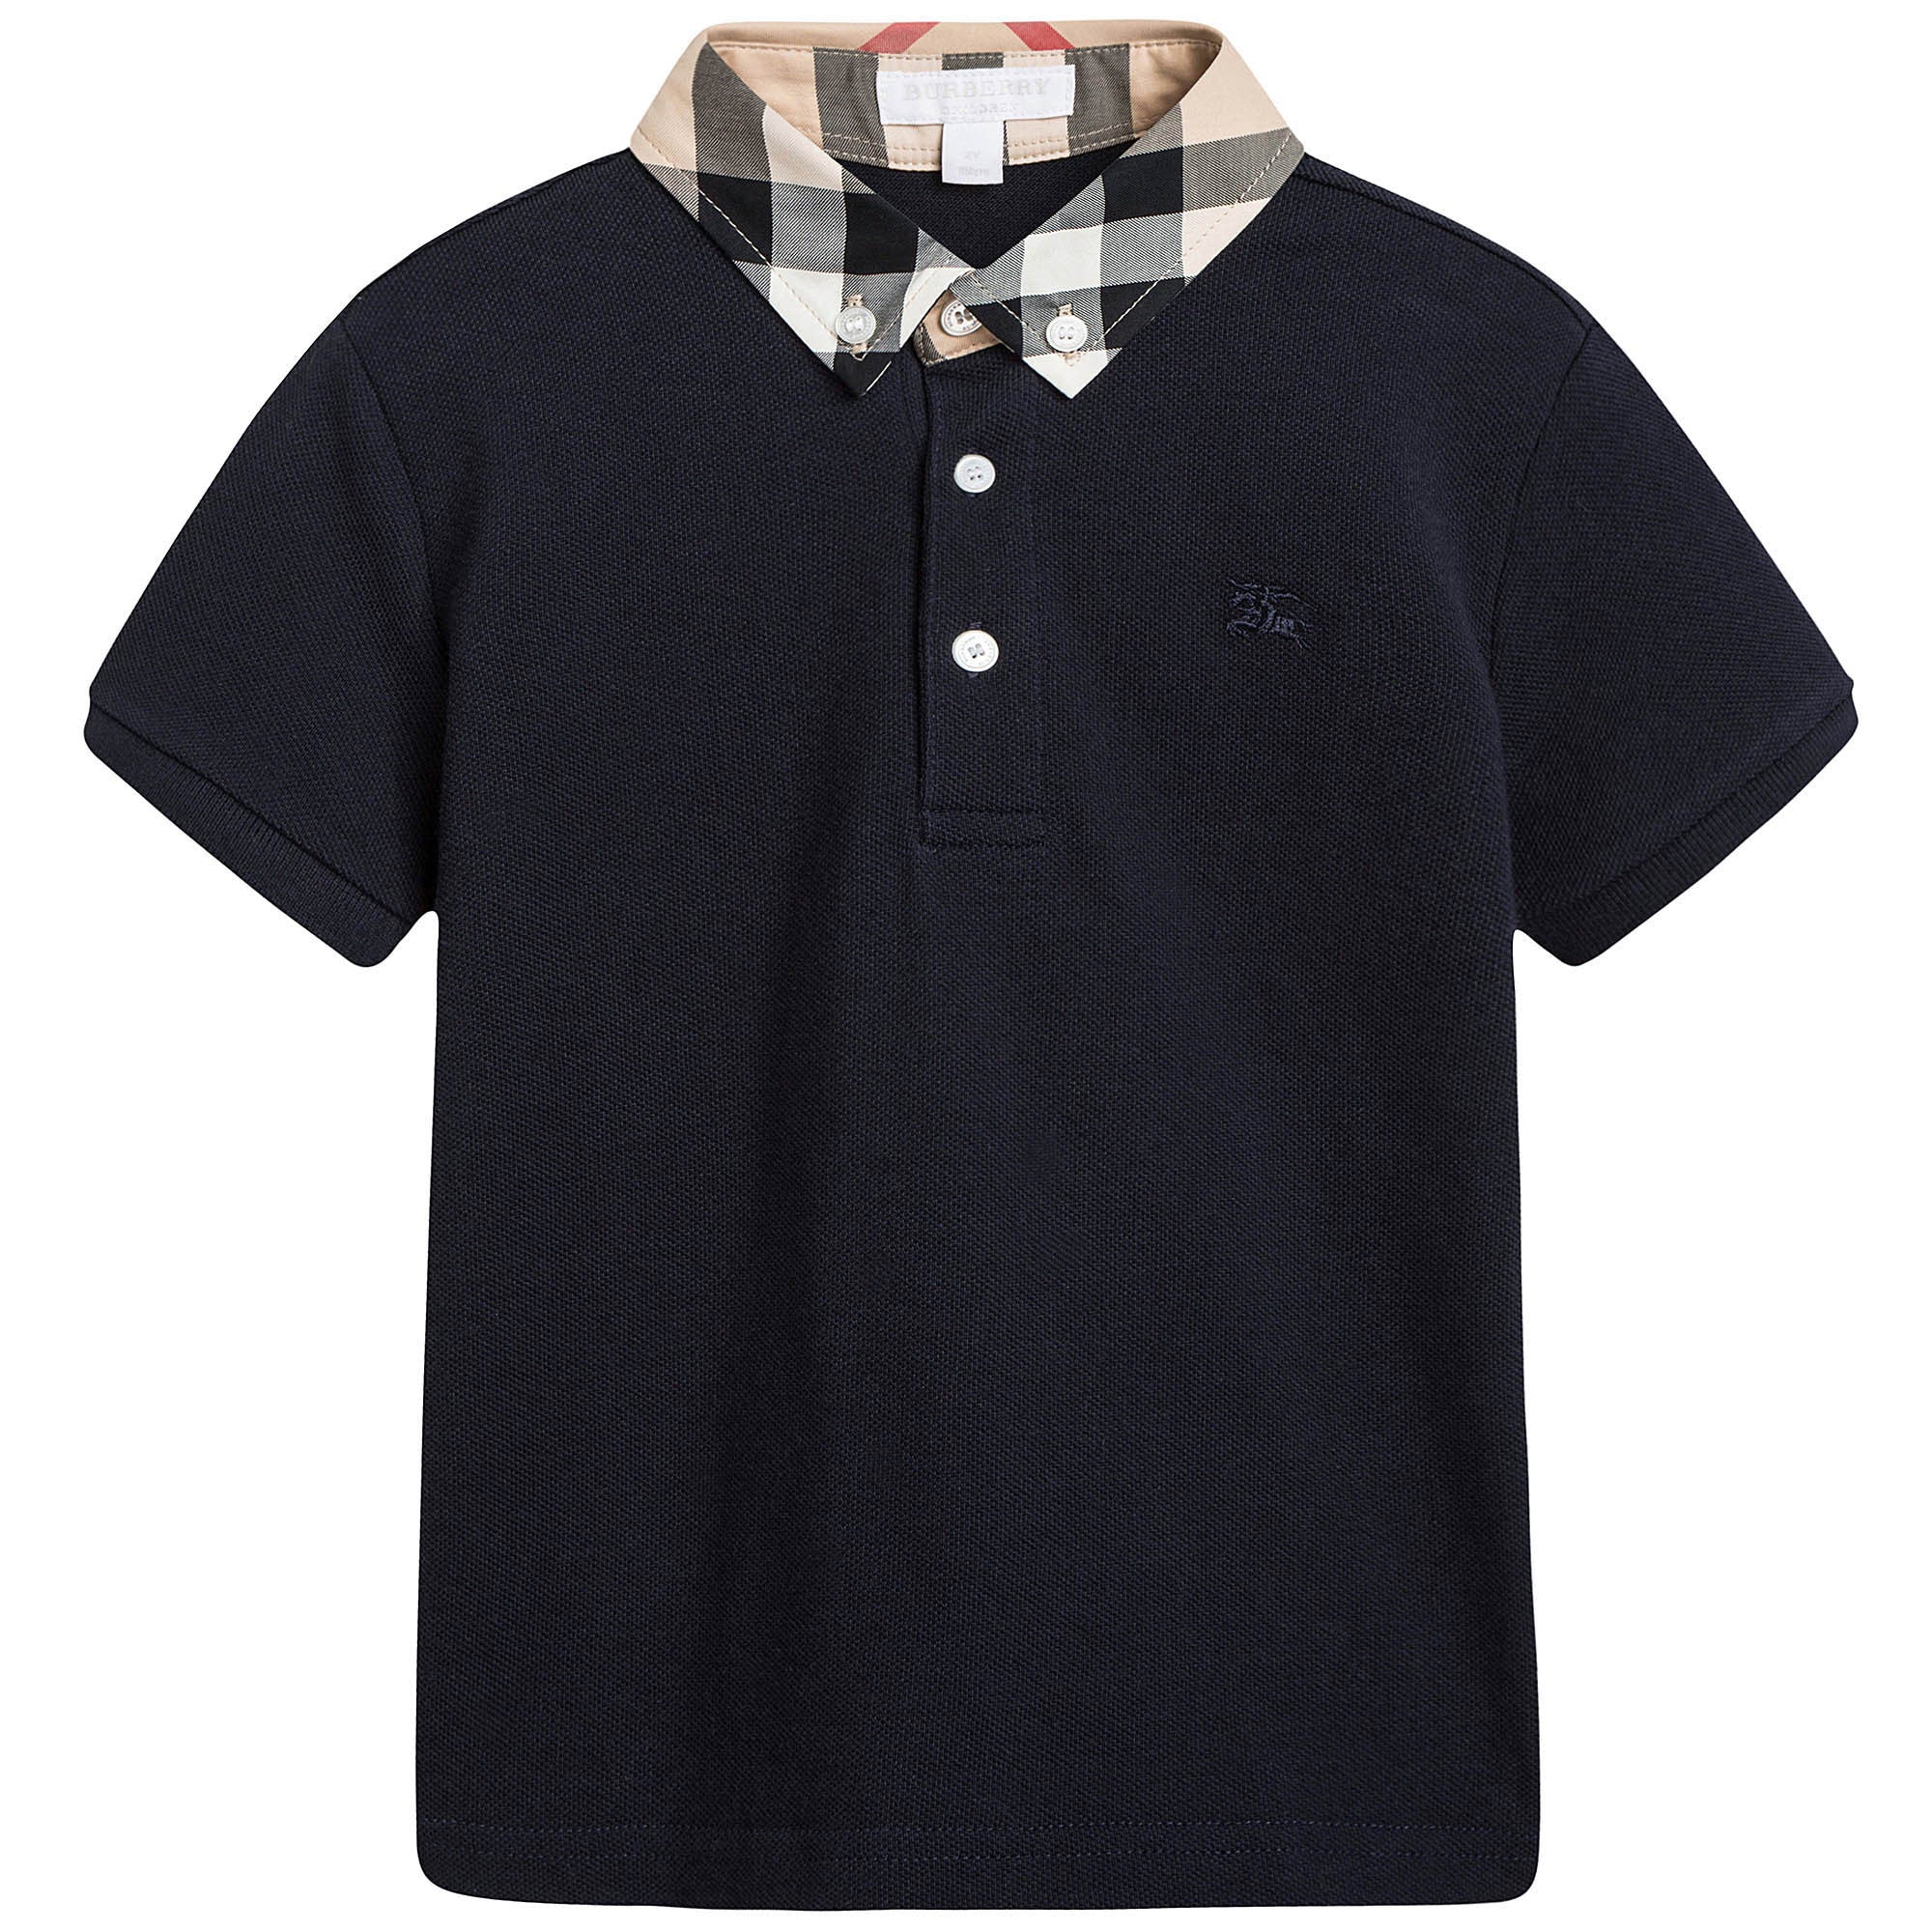 Boys Navy Blue Polo Shirt With Classic Check Collar - CÉMAROSE | Children's Fashion Store - 1